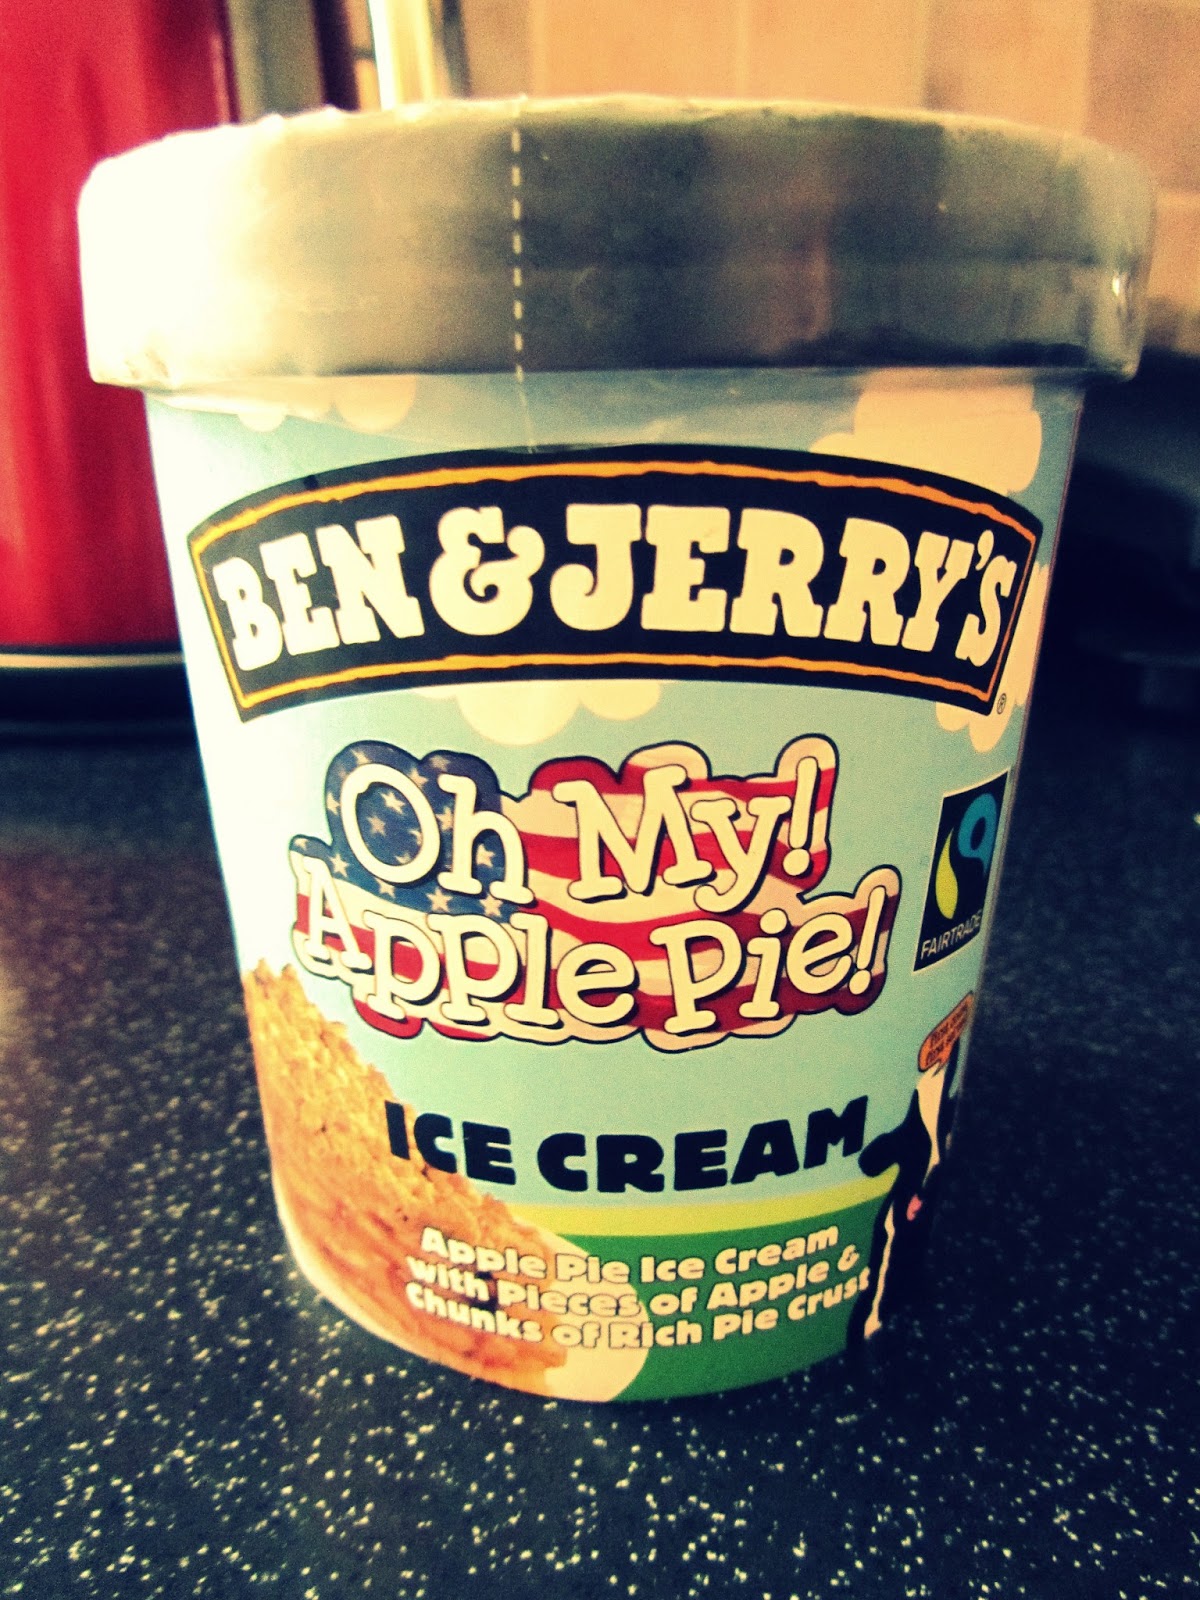 Review Crazy: Ben & Jerry's Oh My! Apple Pie